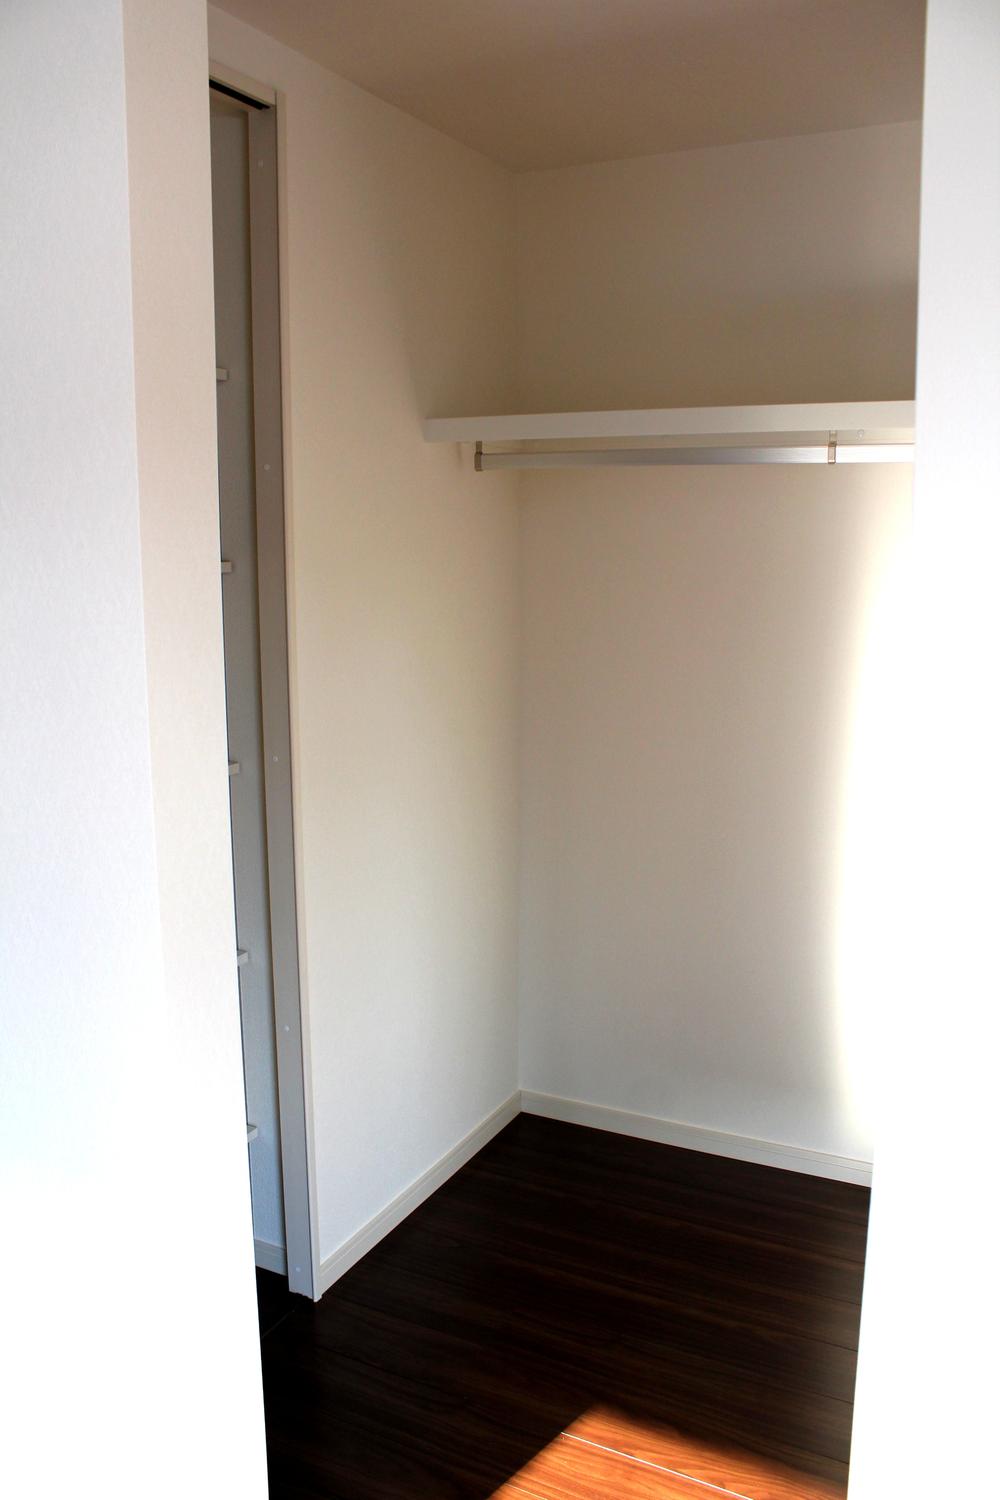 Other introspection. Walk-in closet. Also dismissed clothes. 